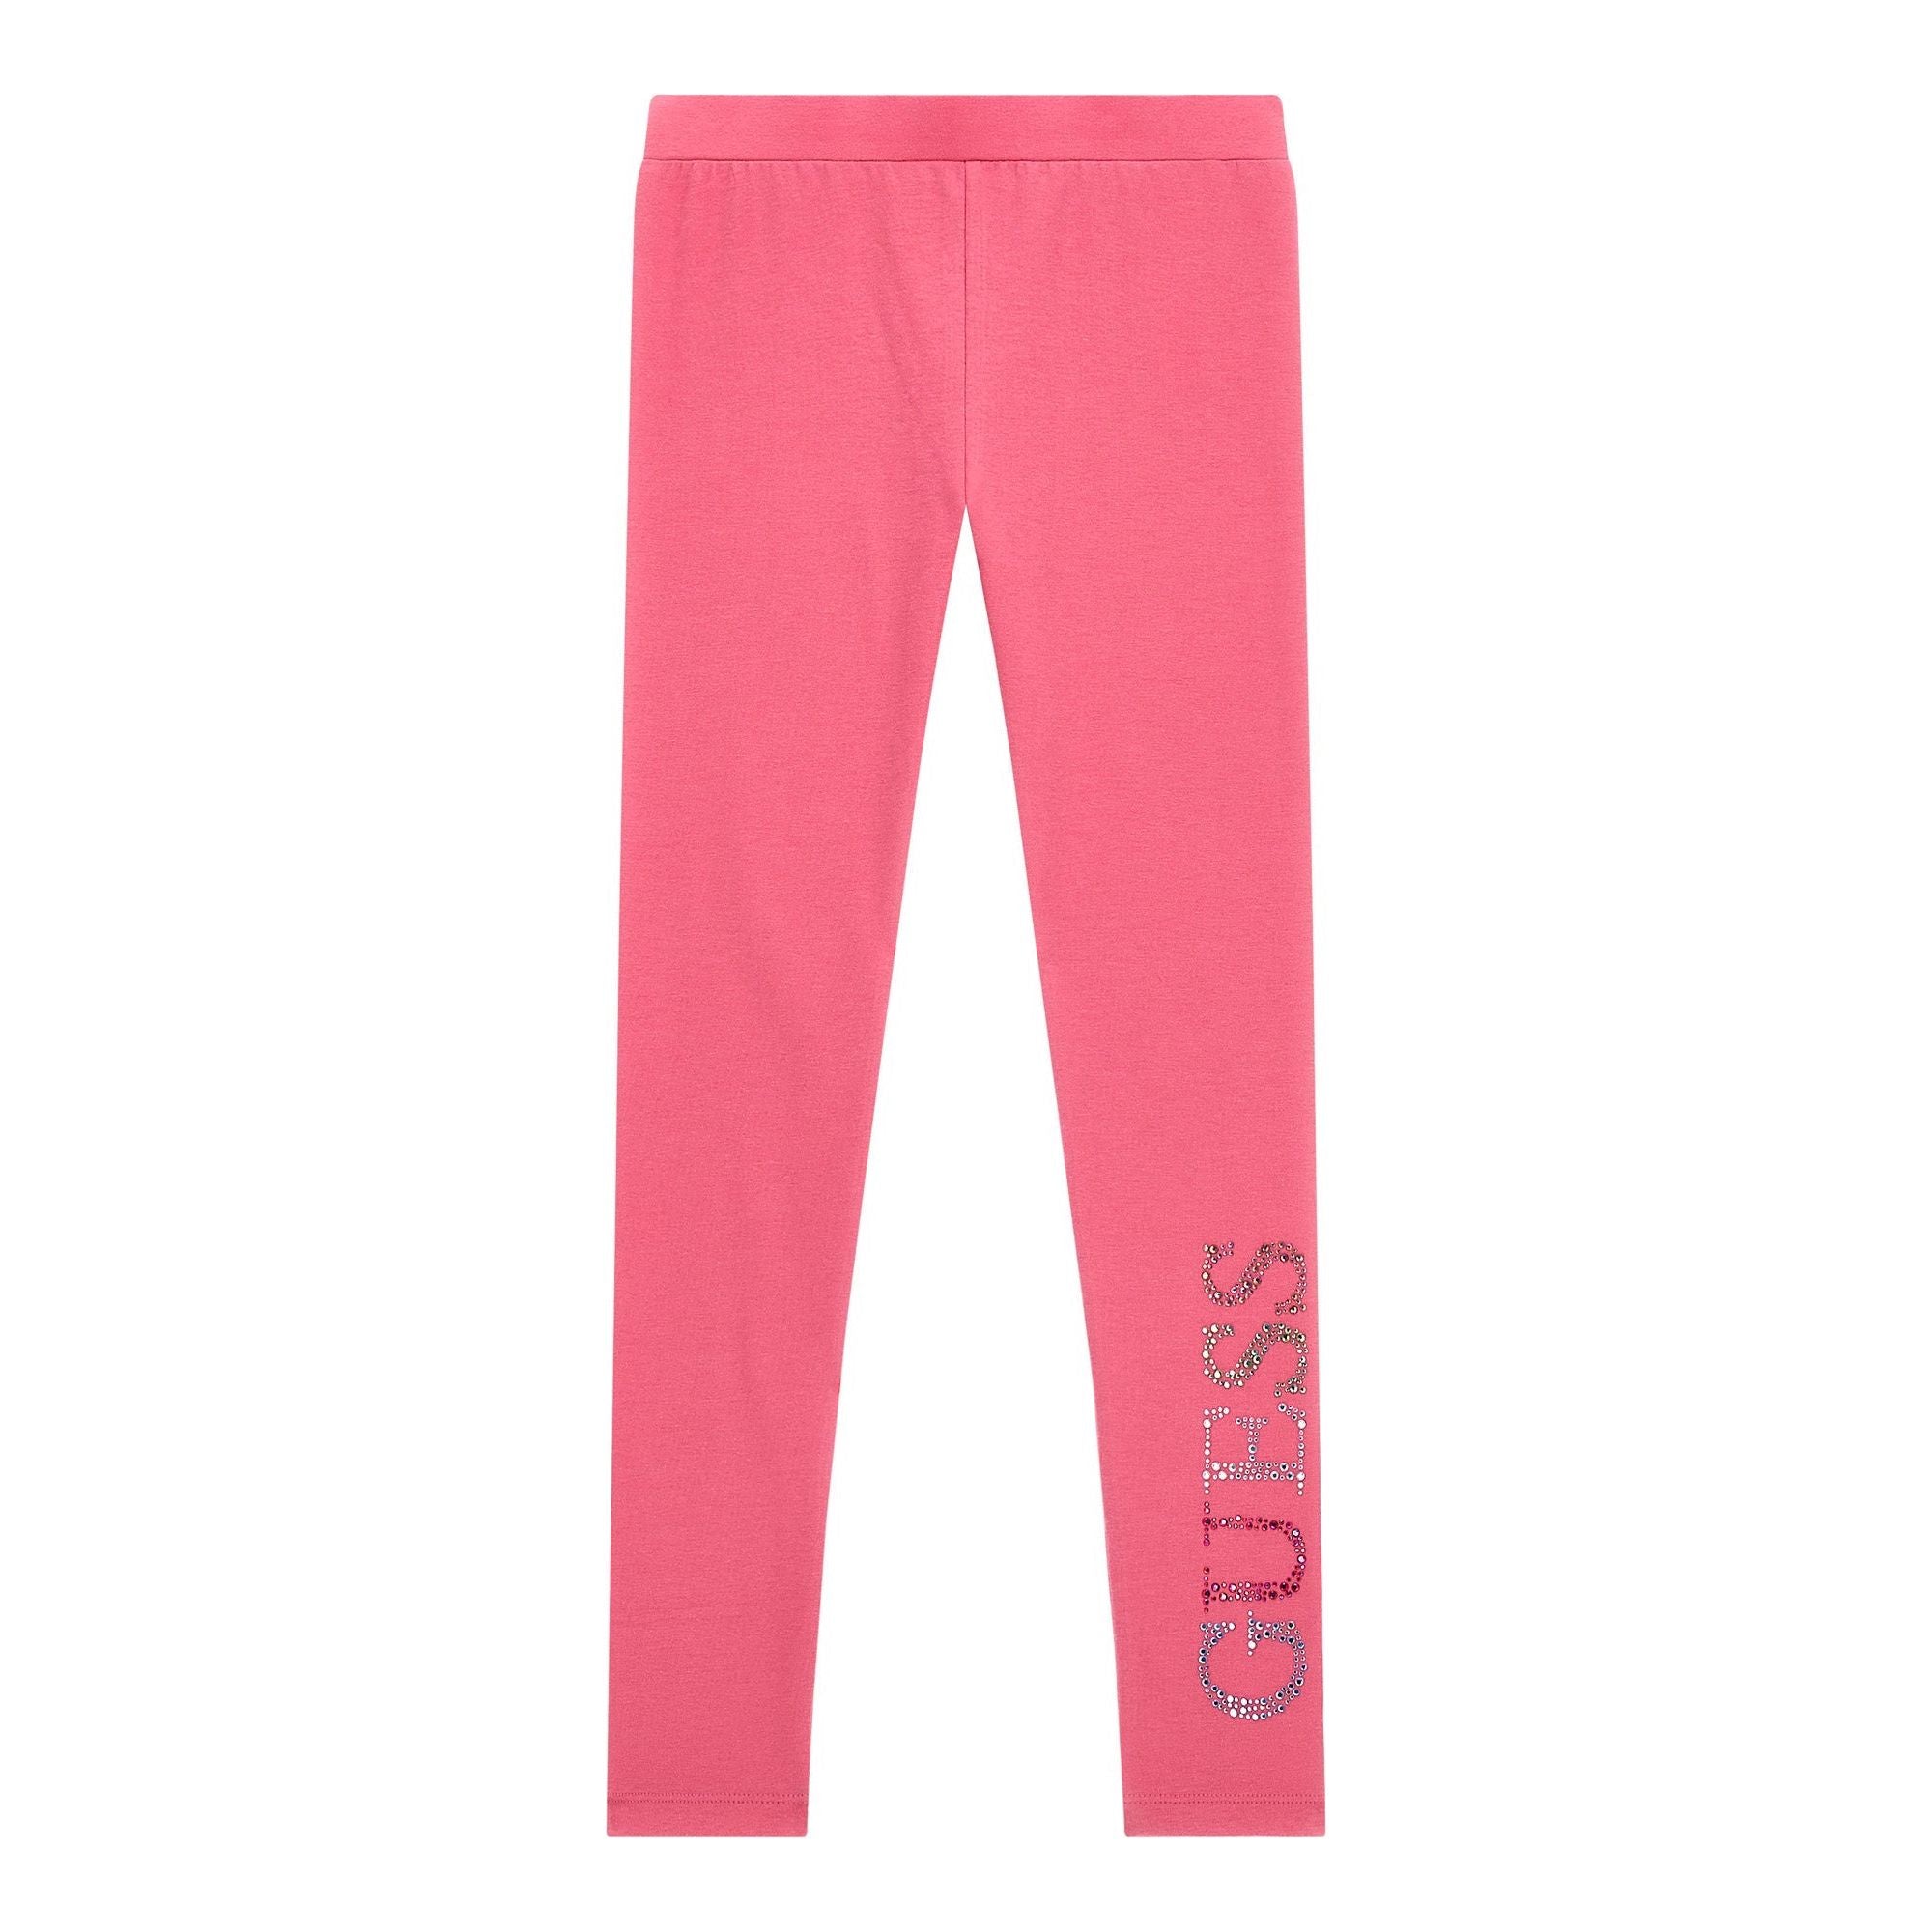 Guess - Girls Legging in Scared Pink